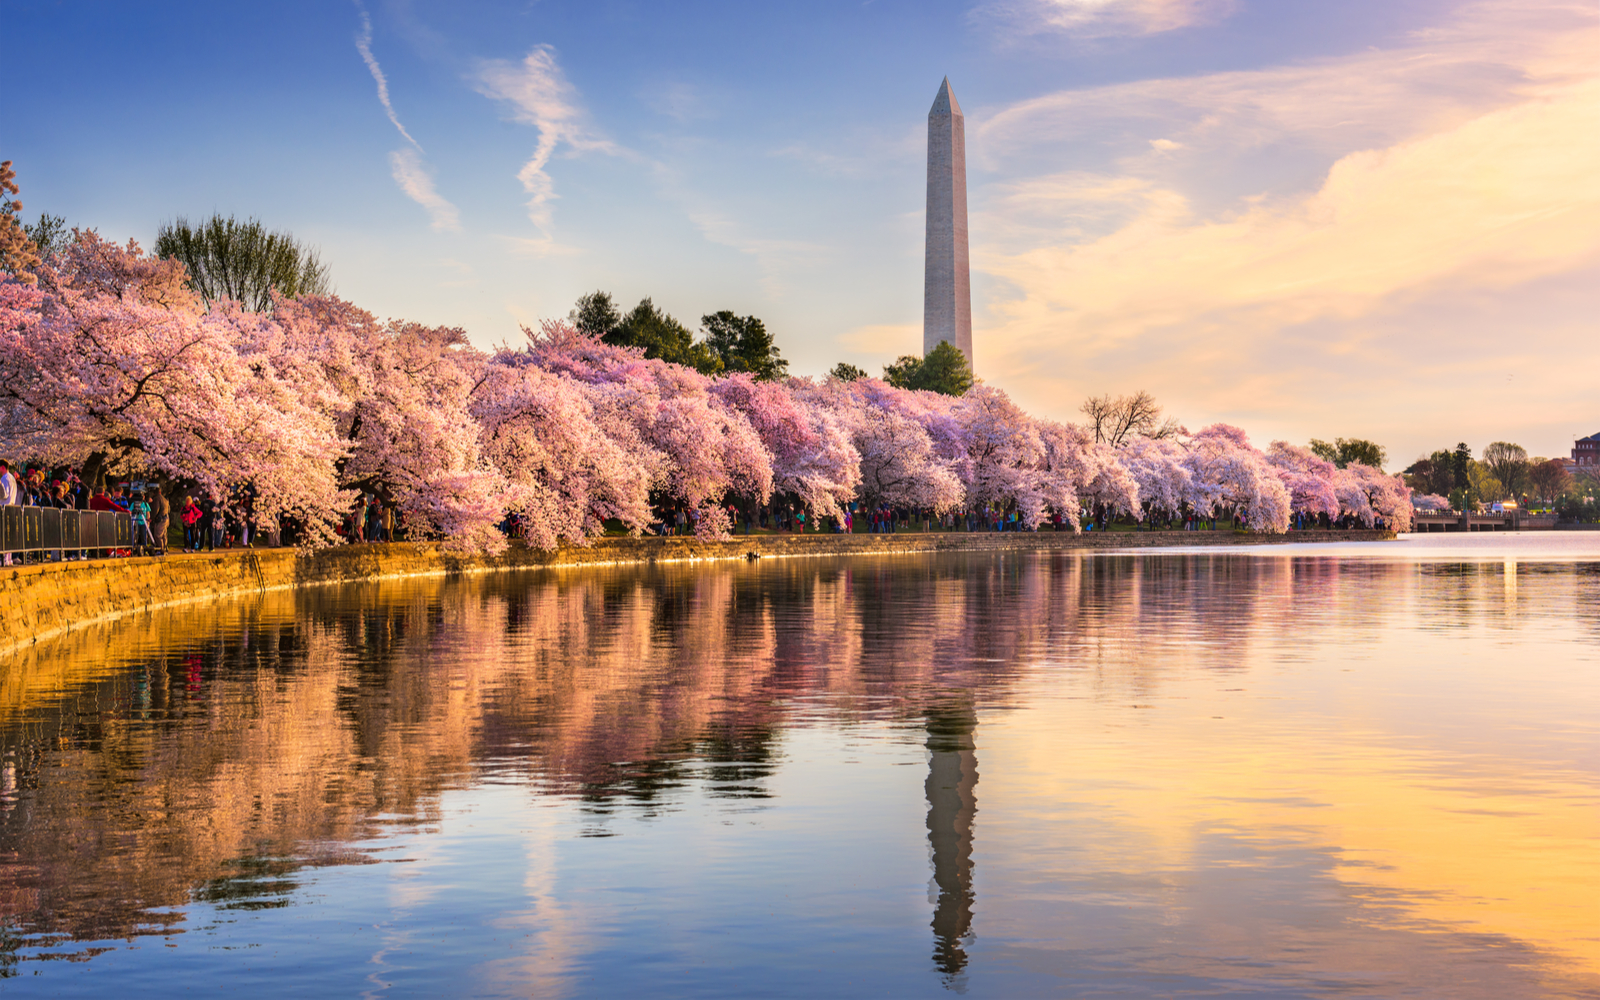 The Best Time to Visit Washington, D.C. in 2022